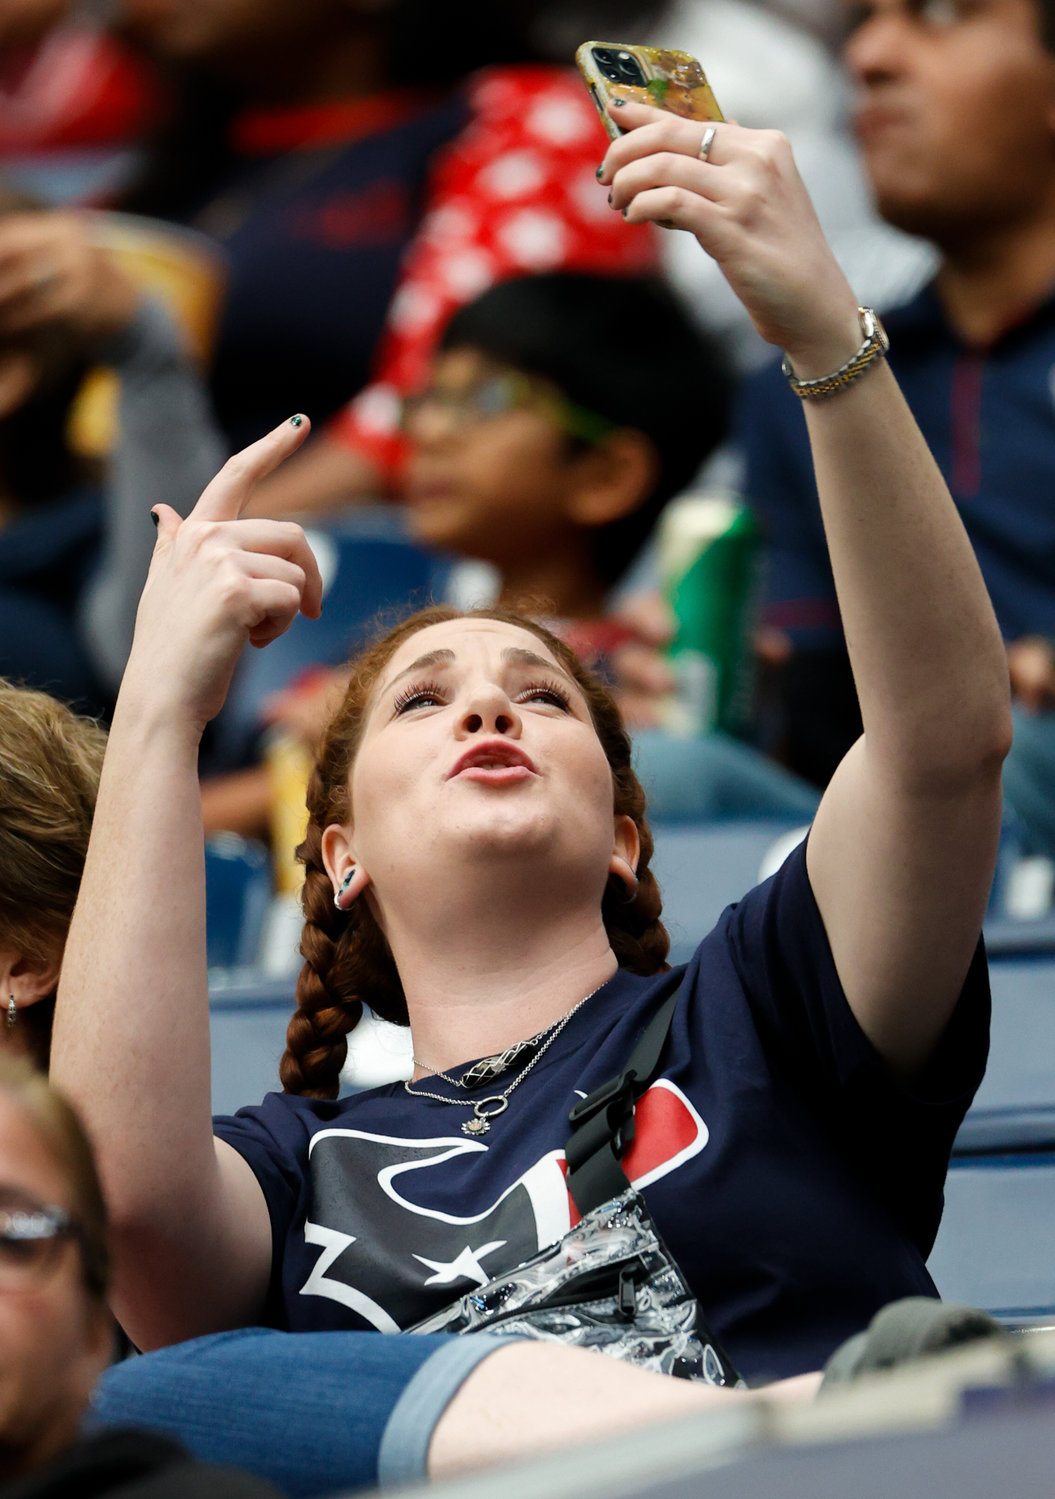 A Texans fan on her phone during an NFL game between the Houston Texans and the Jacksonville Jaguars on Jan. 1, 2023 in Houston. The Jaguars won, 31-3.